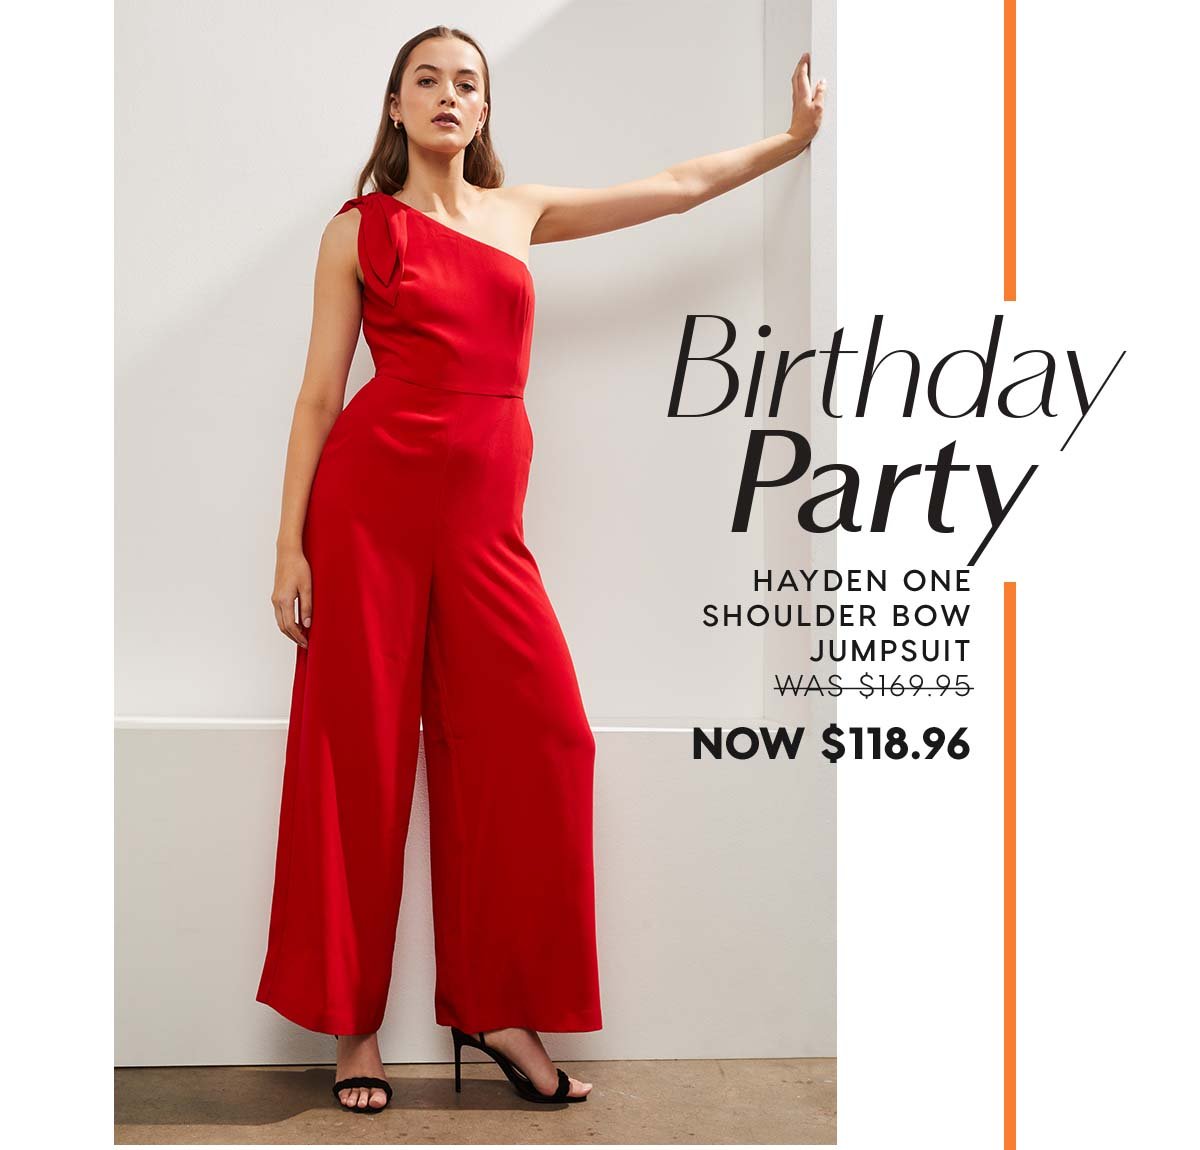 Birthday Party. Hayden One Shoulder Bow Jumpsuit  WAS $169.95 NOW $118.96